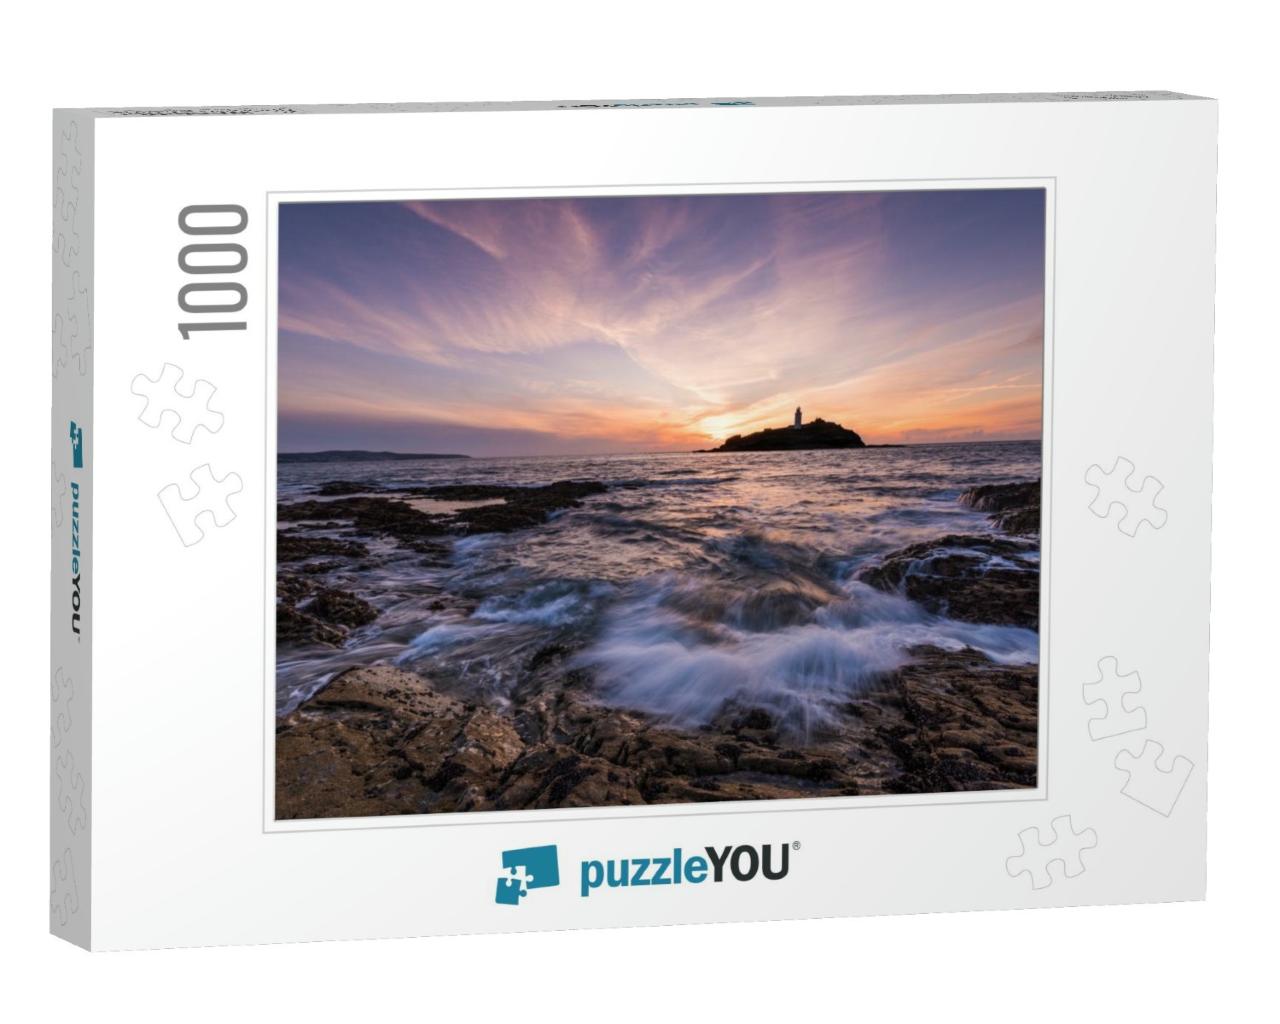 Godrevy Lighthouse, Cornwall - Long Exposure Seascape in... Jigsaw Puzzle with 1000 pieces